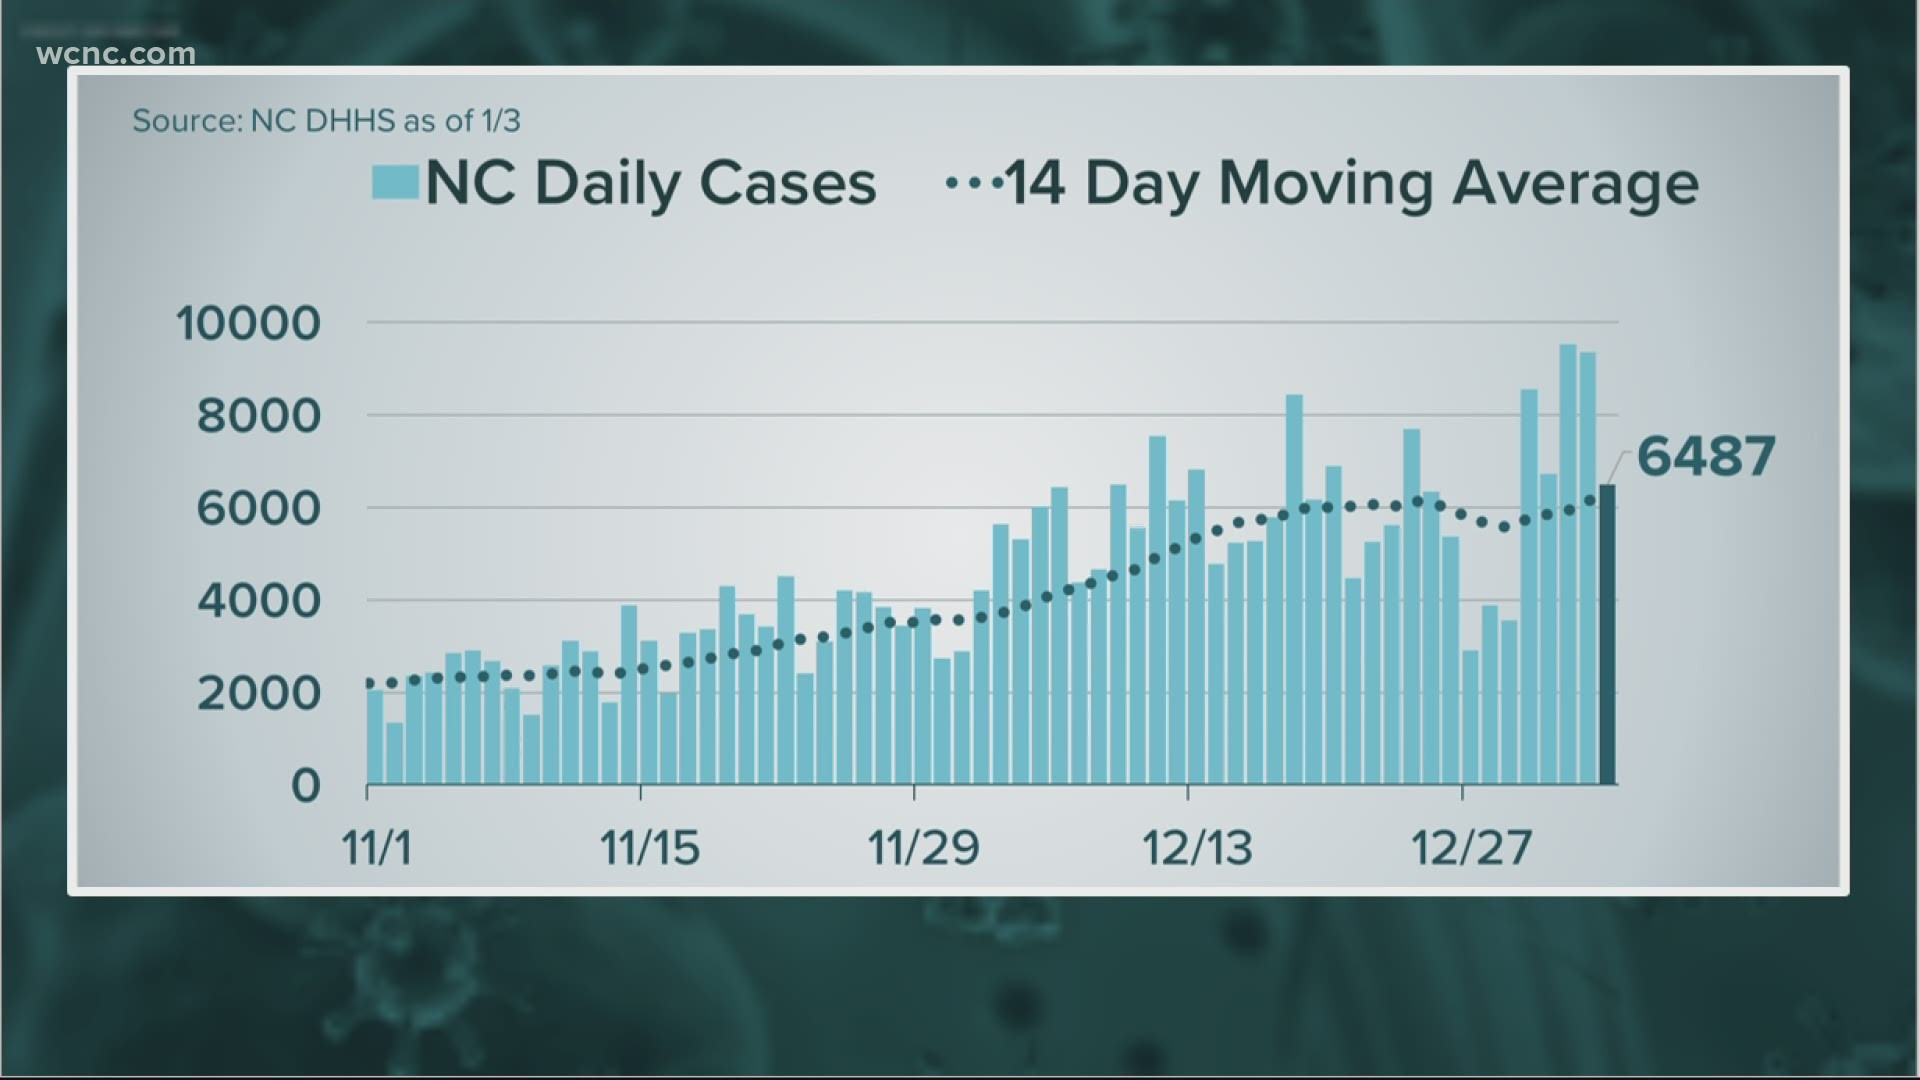 North Carolina health officials reported over 6,400 new COVID-19 cases Sunday after two record high days on Friday and Saturday to start 2021.